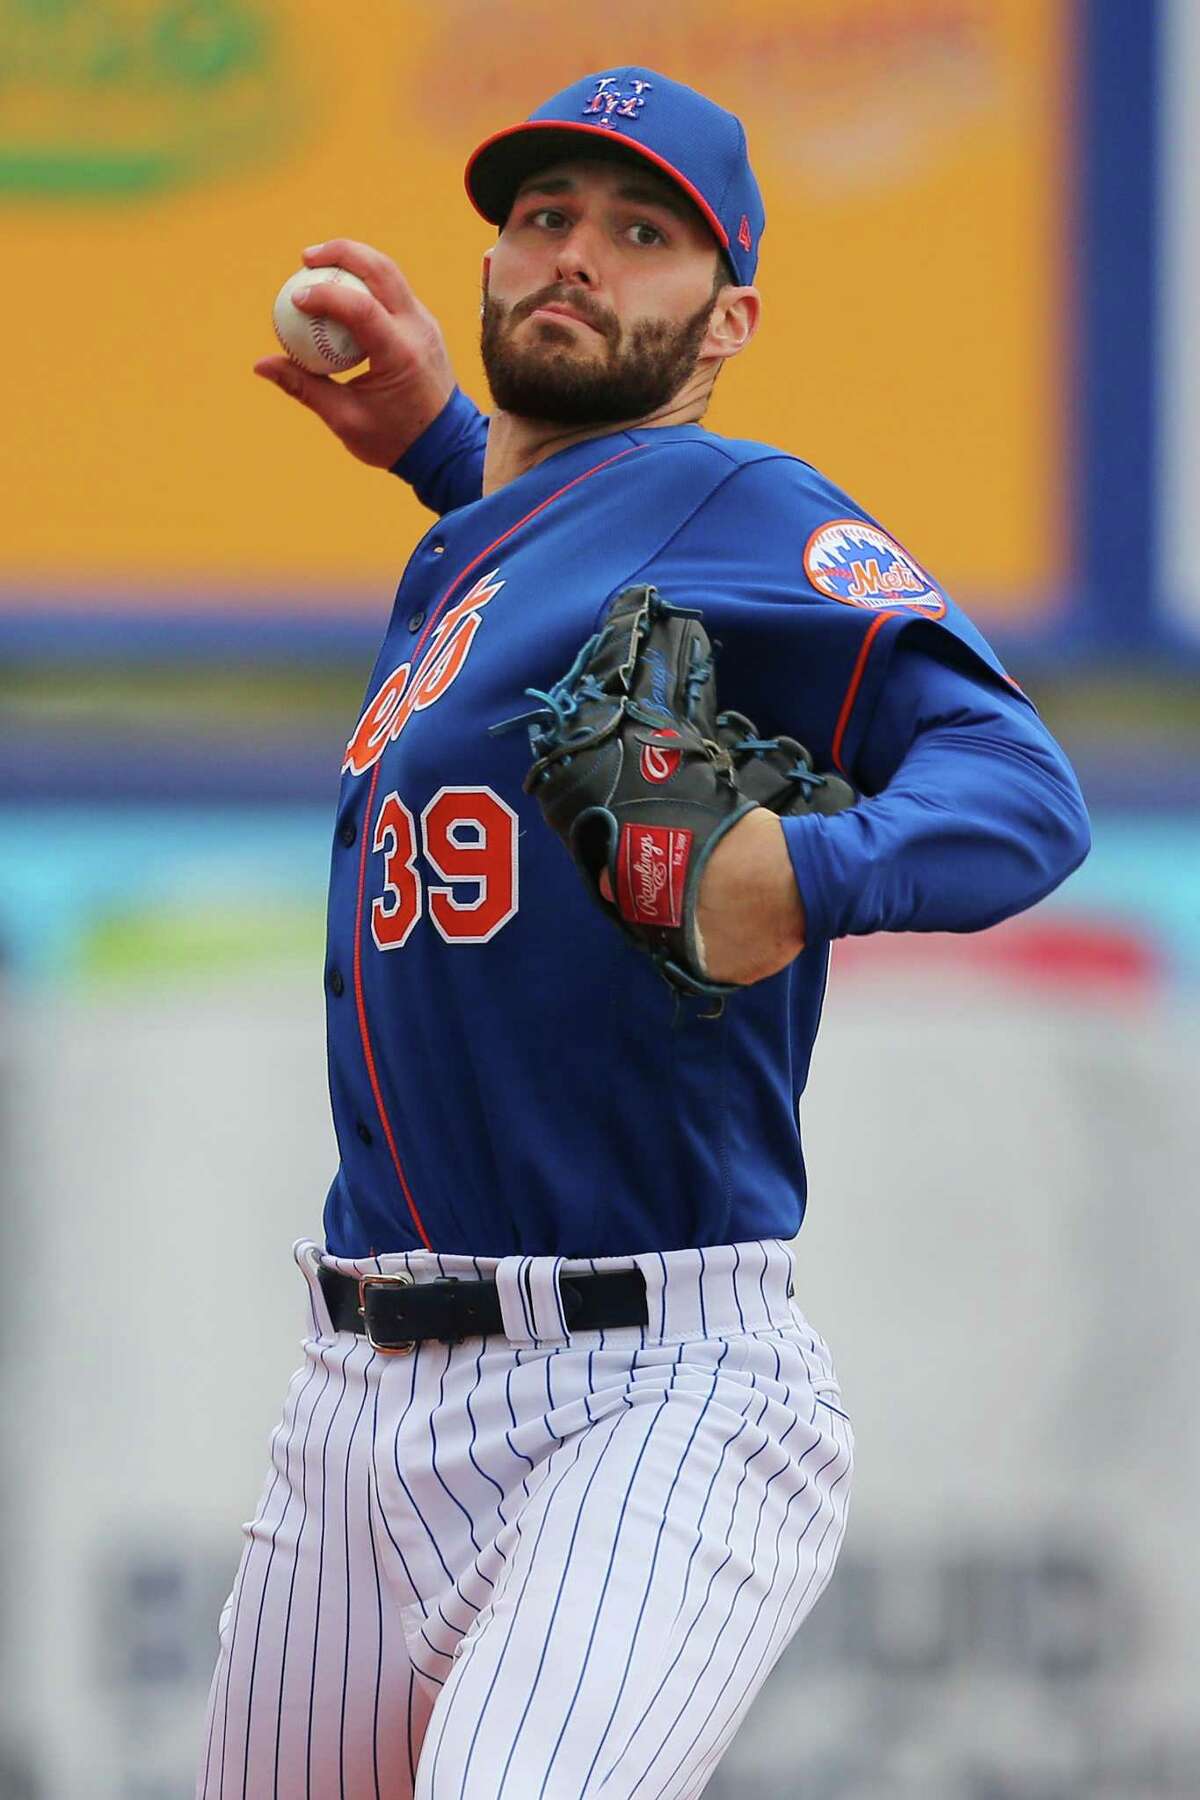 Milford’s Joe Zanghi started the season with Binghamton, the Mets’ Double-A affiliate.